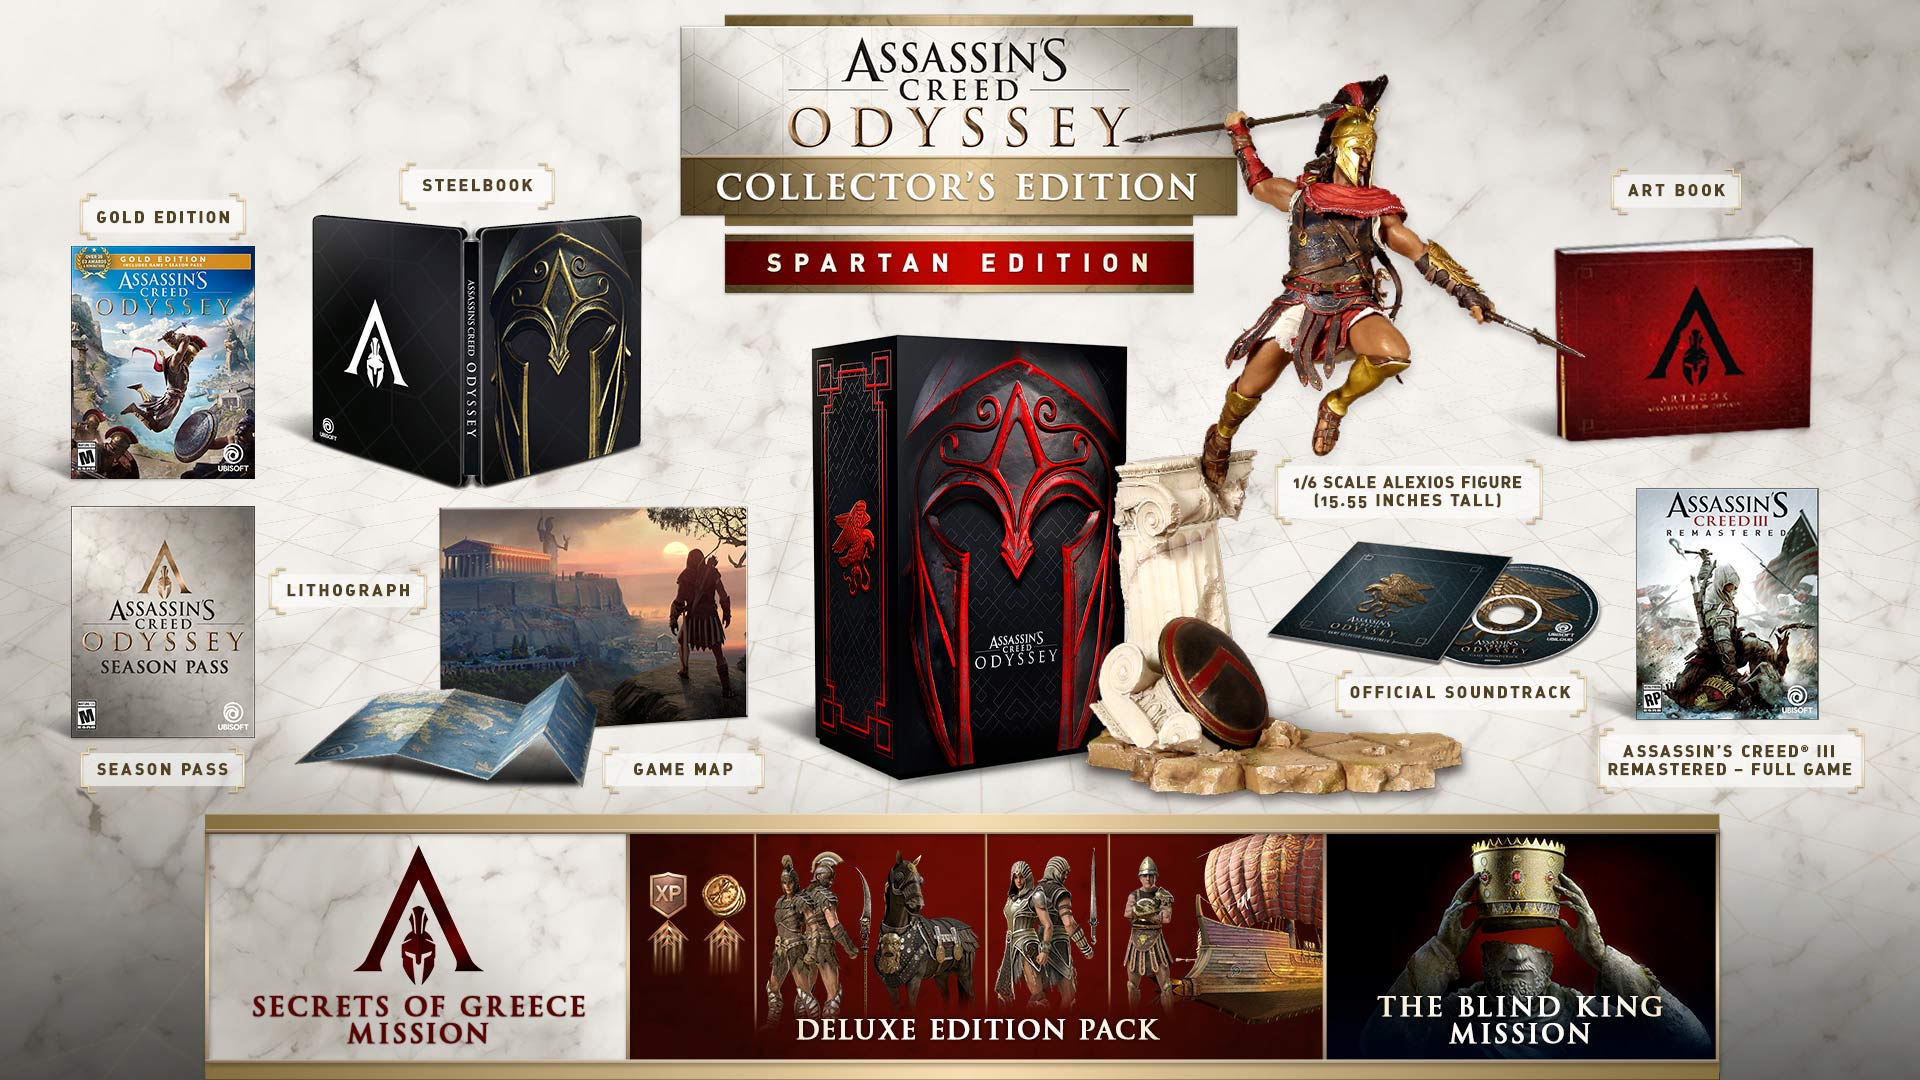 Buy Assassin's Creed® Odyssey Spartan Collector's Edition for PS4 | Ubisoft  Official Store